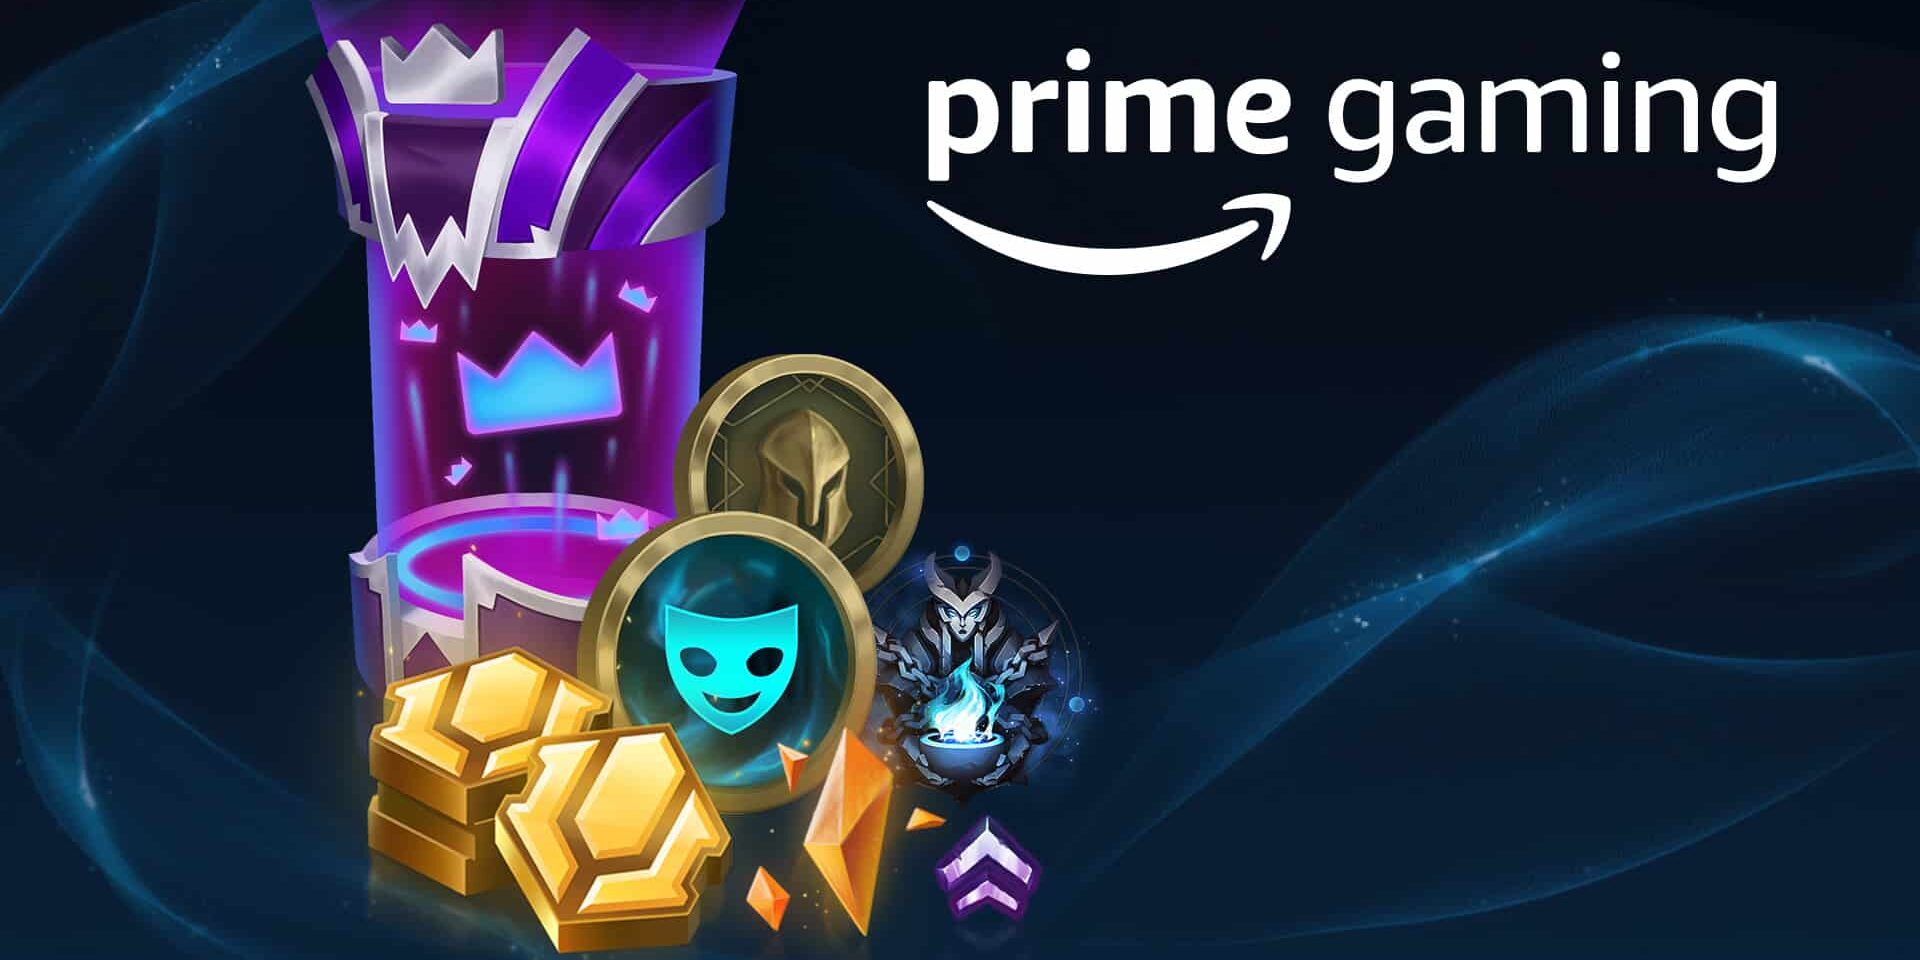 January Prime Gaming Capsule Extended: Bad News In Disguise?